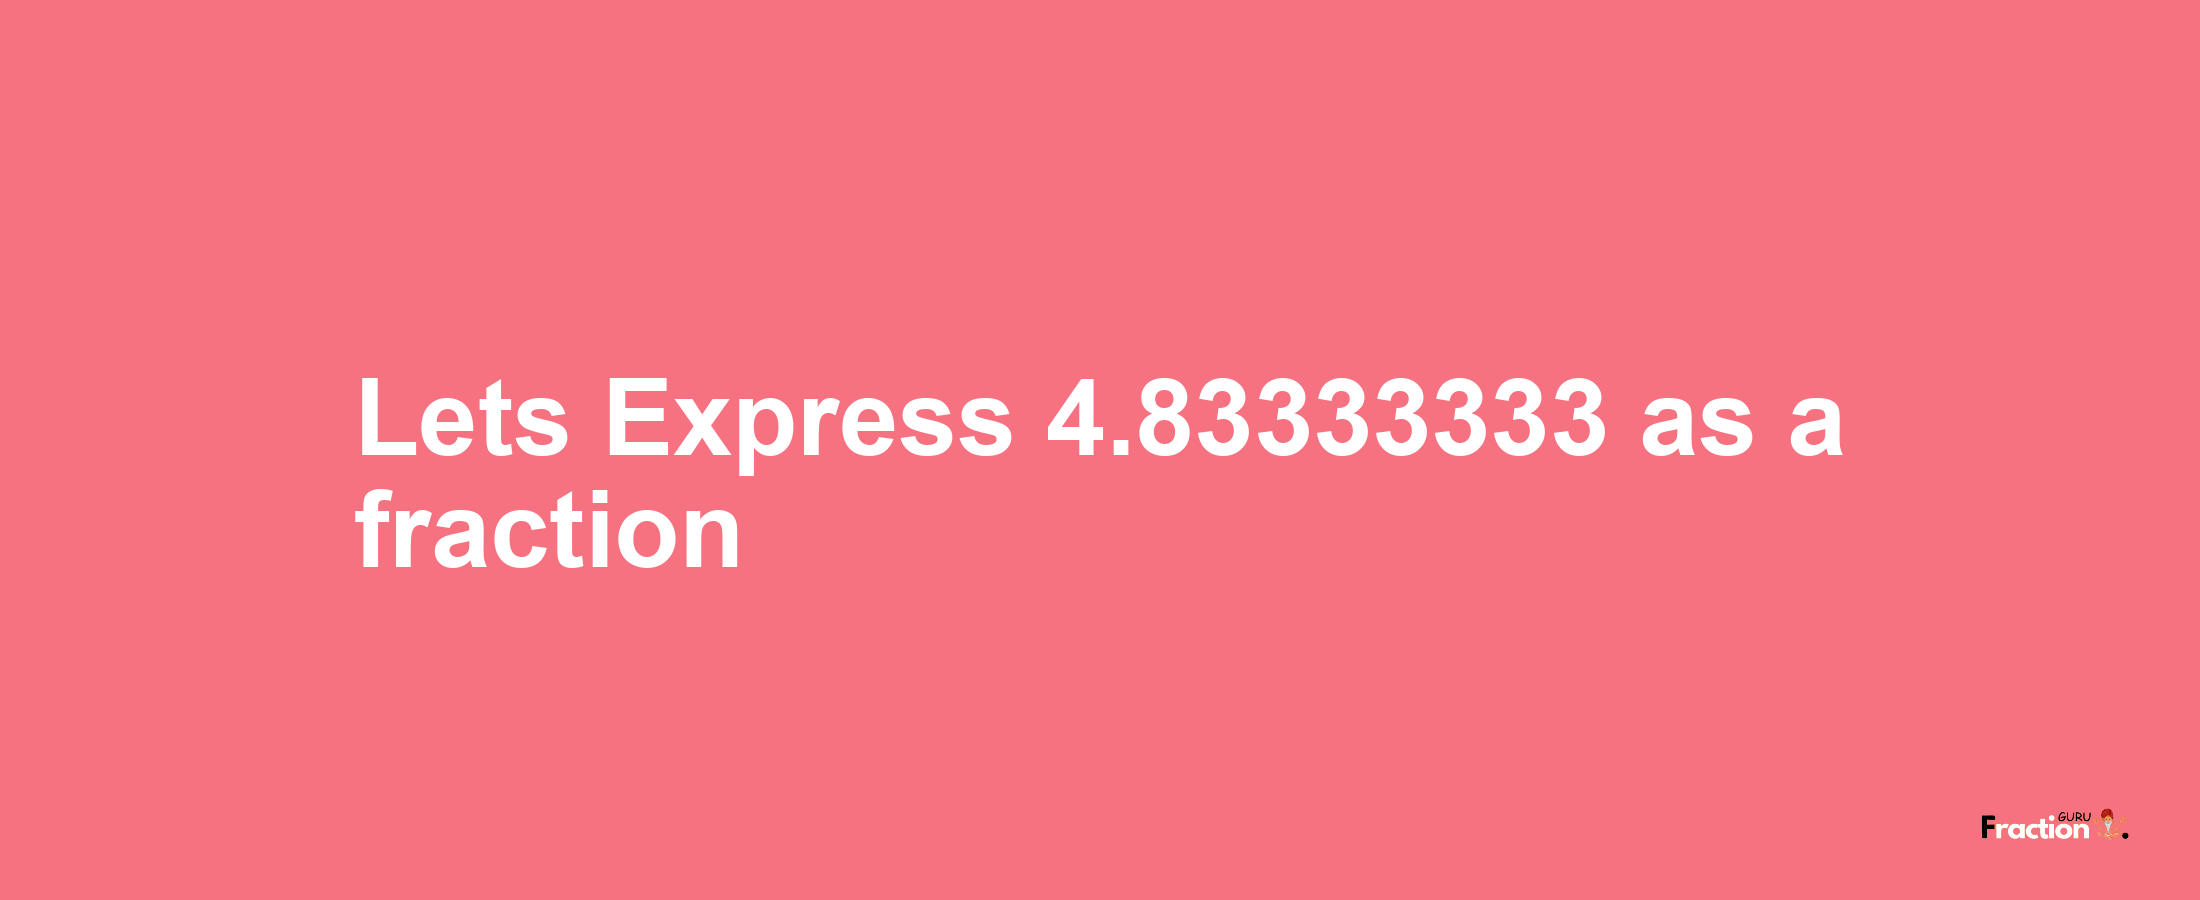 Lets Express 4.83333333 as afraction